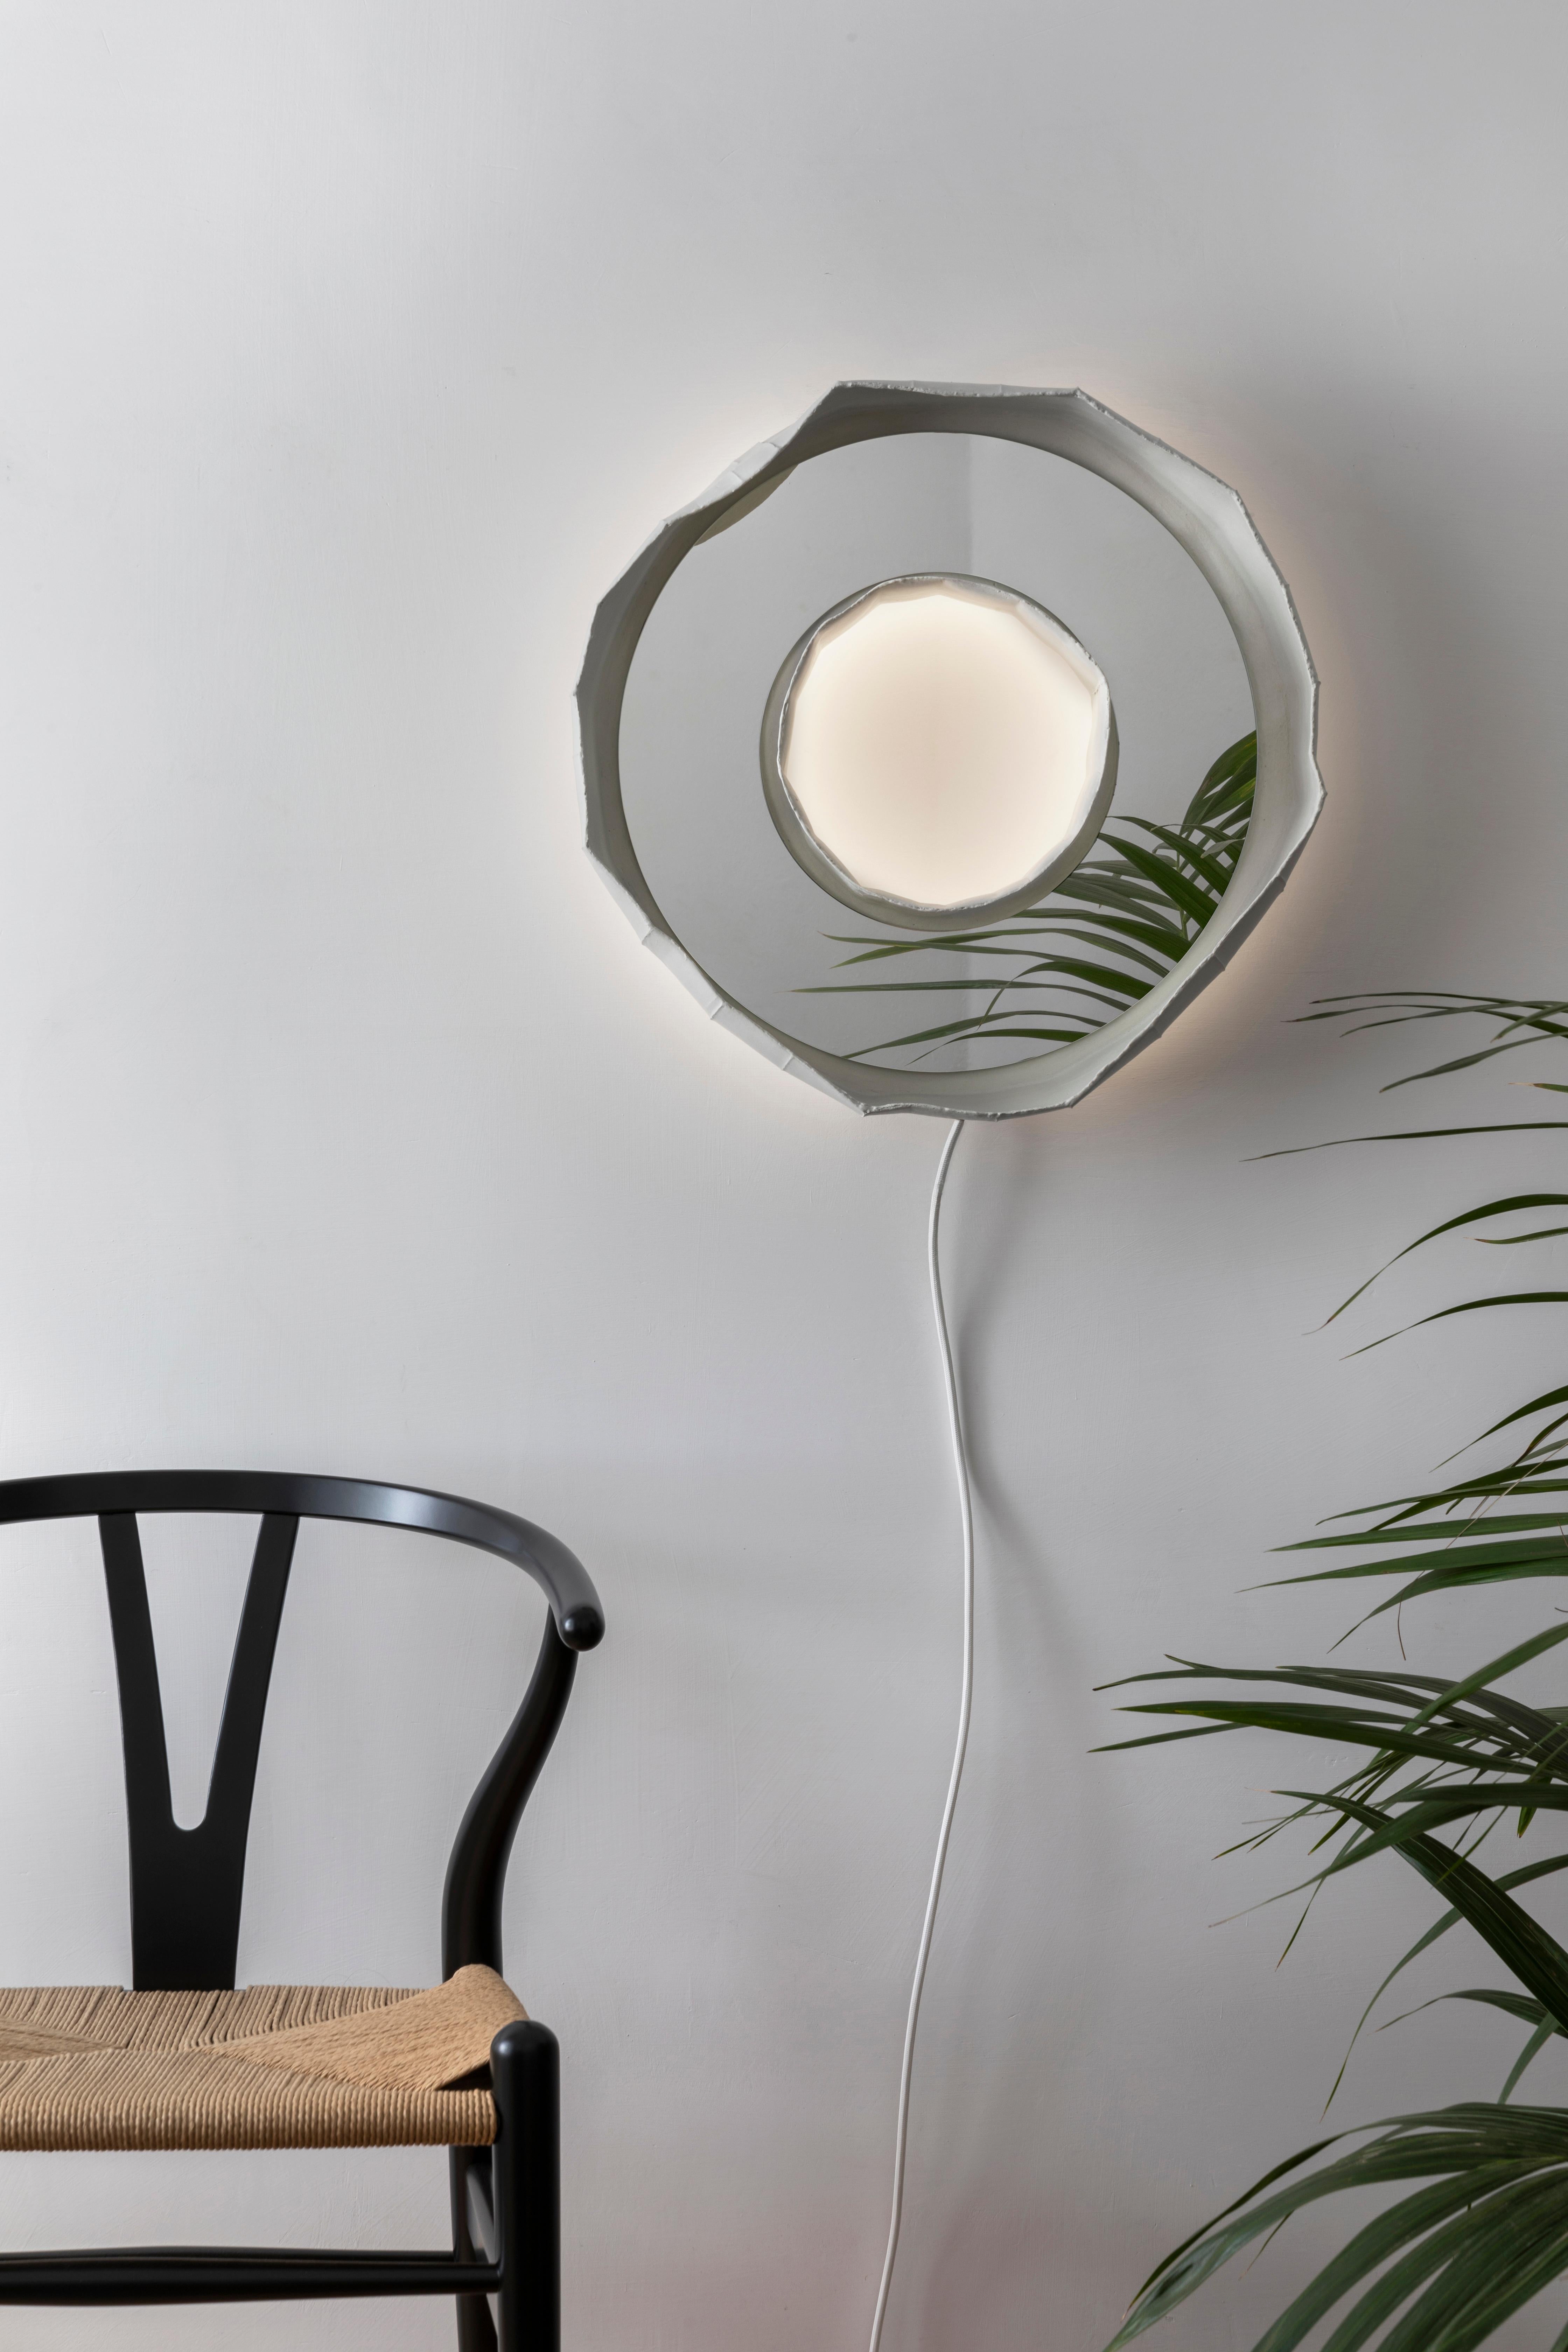 RING AURA, a stunning mirror-lamp handmade in Italy, one of 2 designs that make up the collection REFLECTIONS, the result of a collaboration between artist Paola Paronetto & designer Giovanni Botticelli, that integrates ceramic with colour, glass